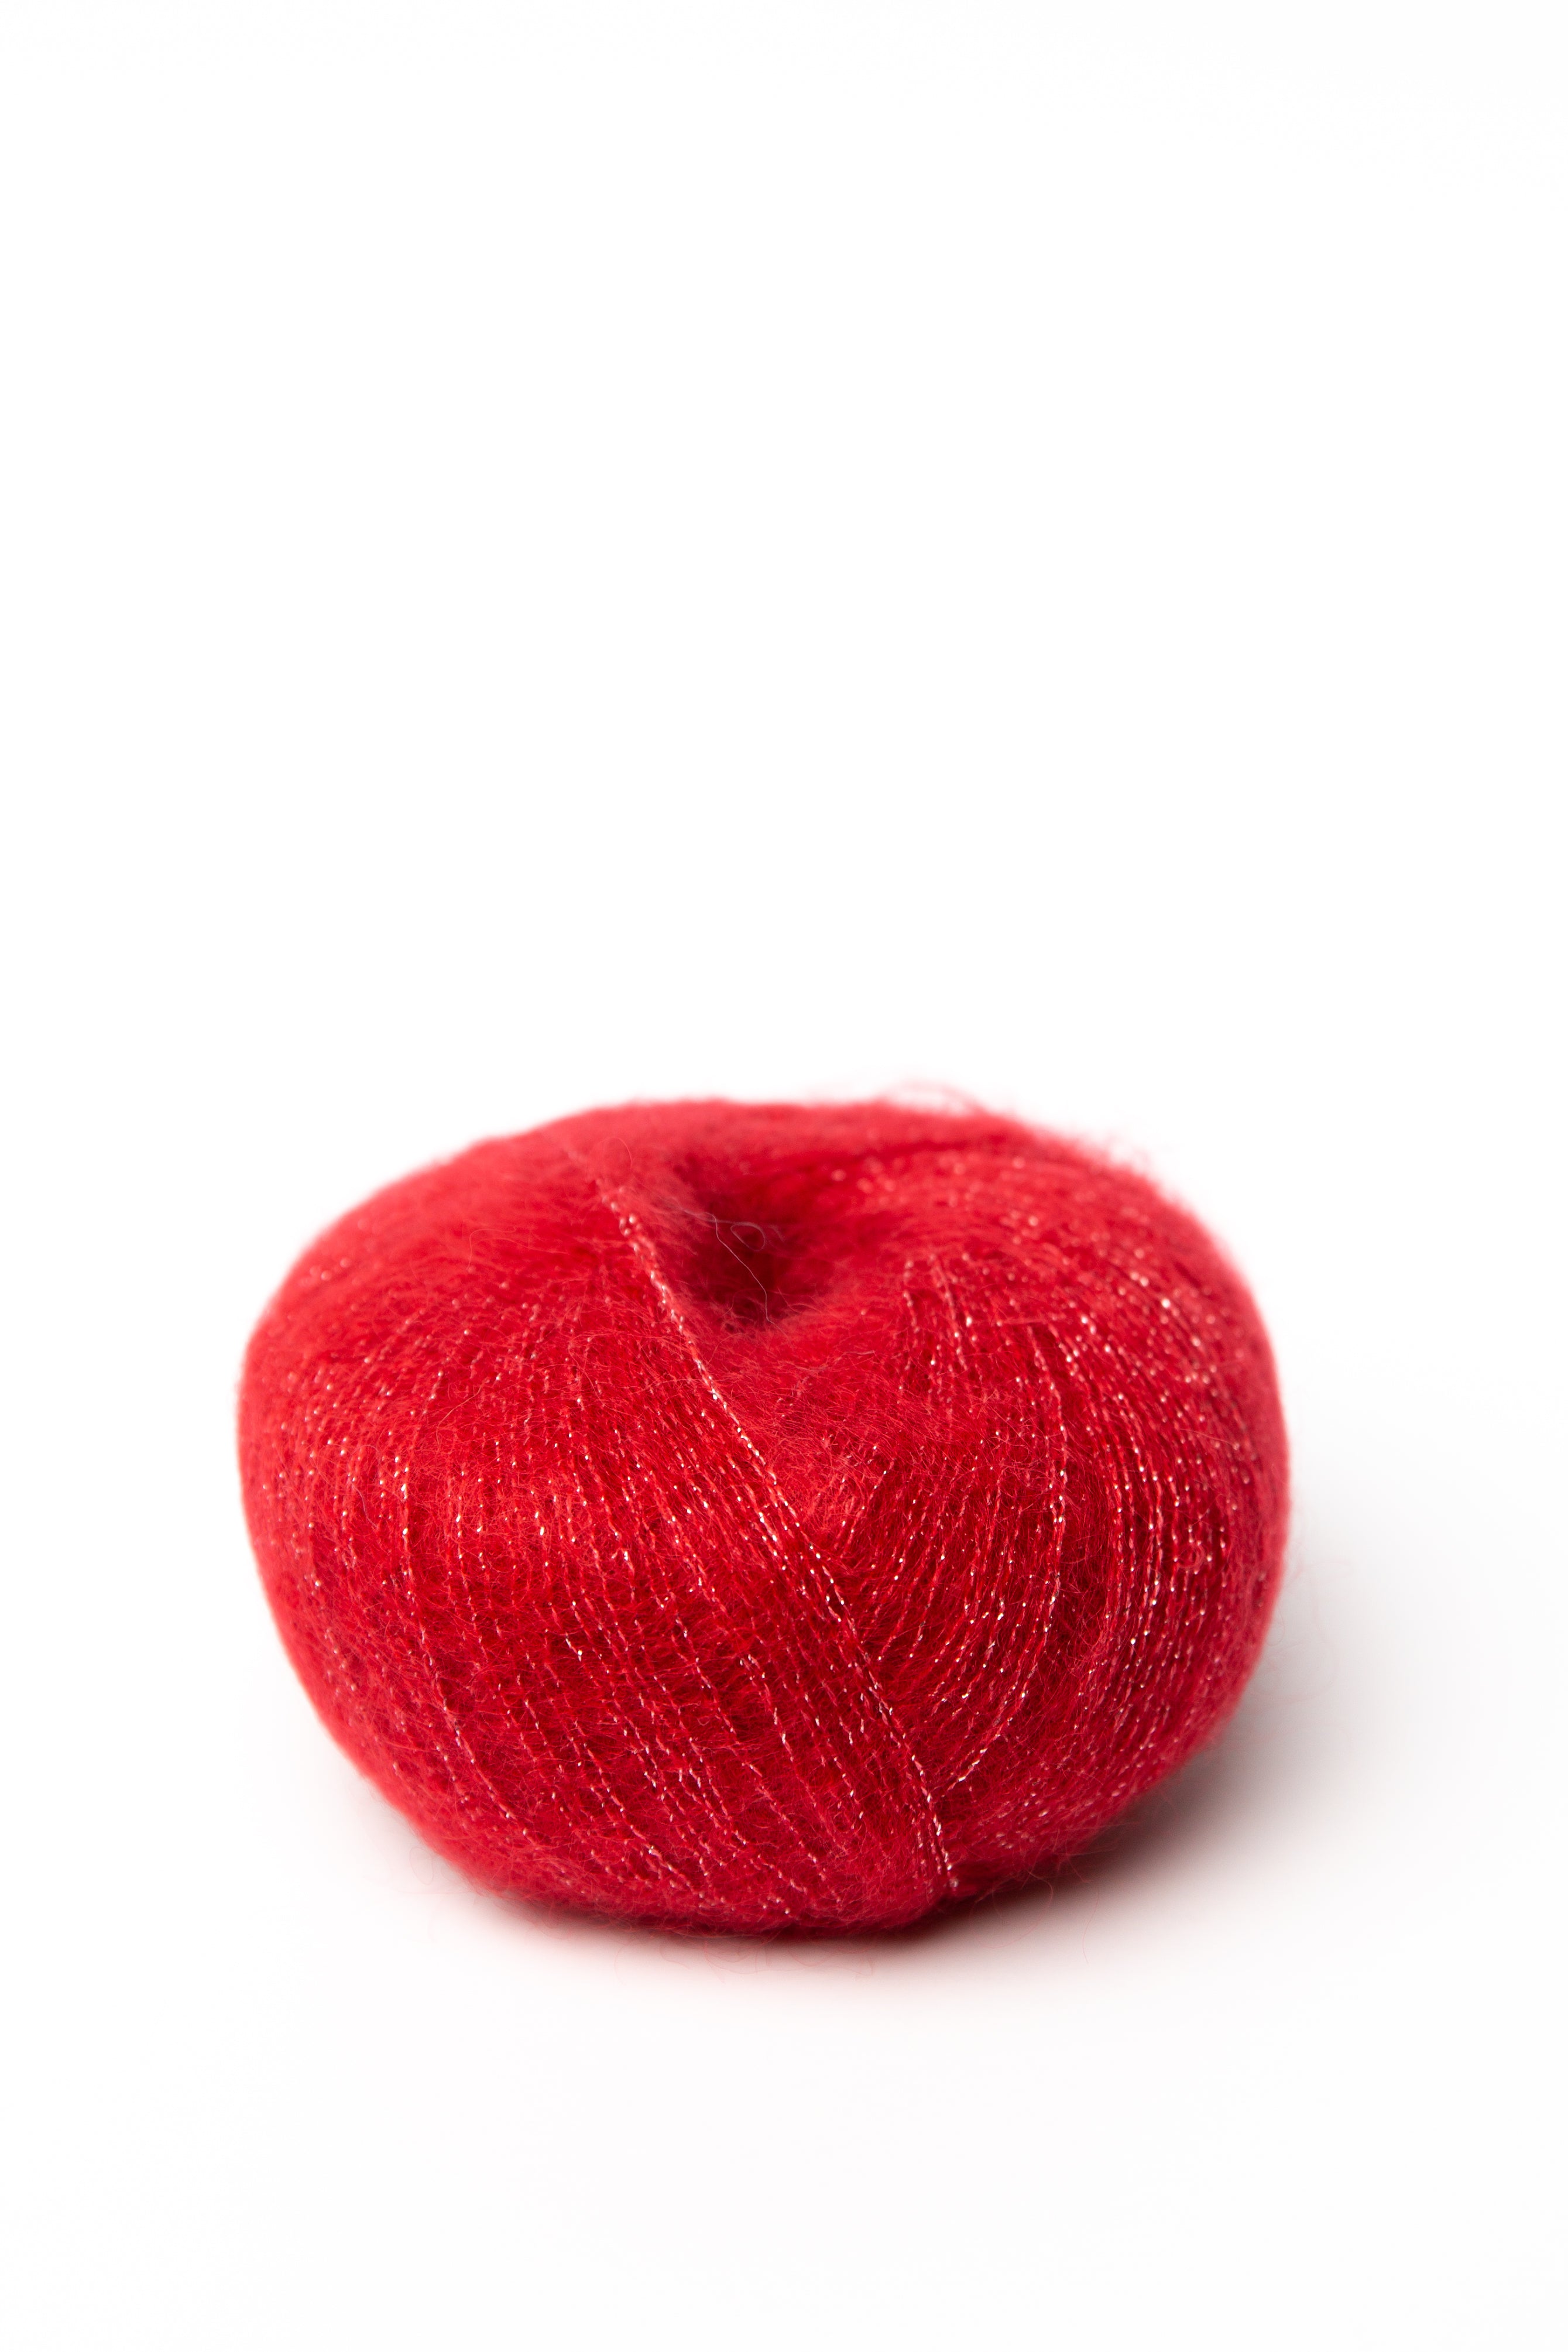 Silk Mohair Lux Lana Gatto  Shop Yarn Online Today - Beehive Wool Shop